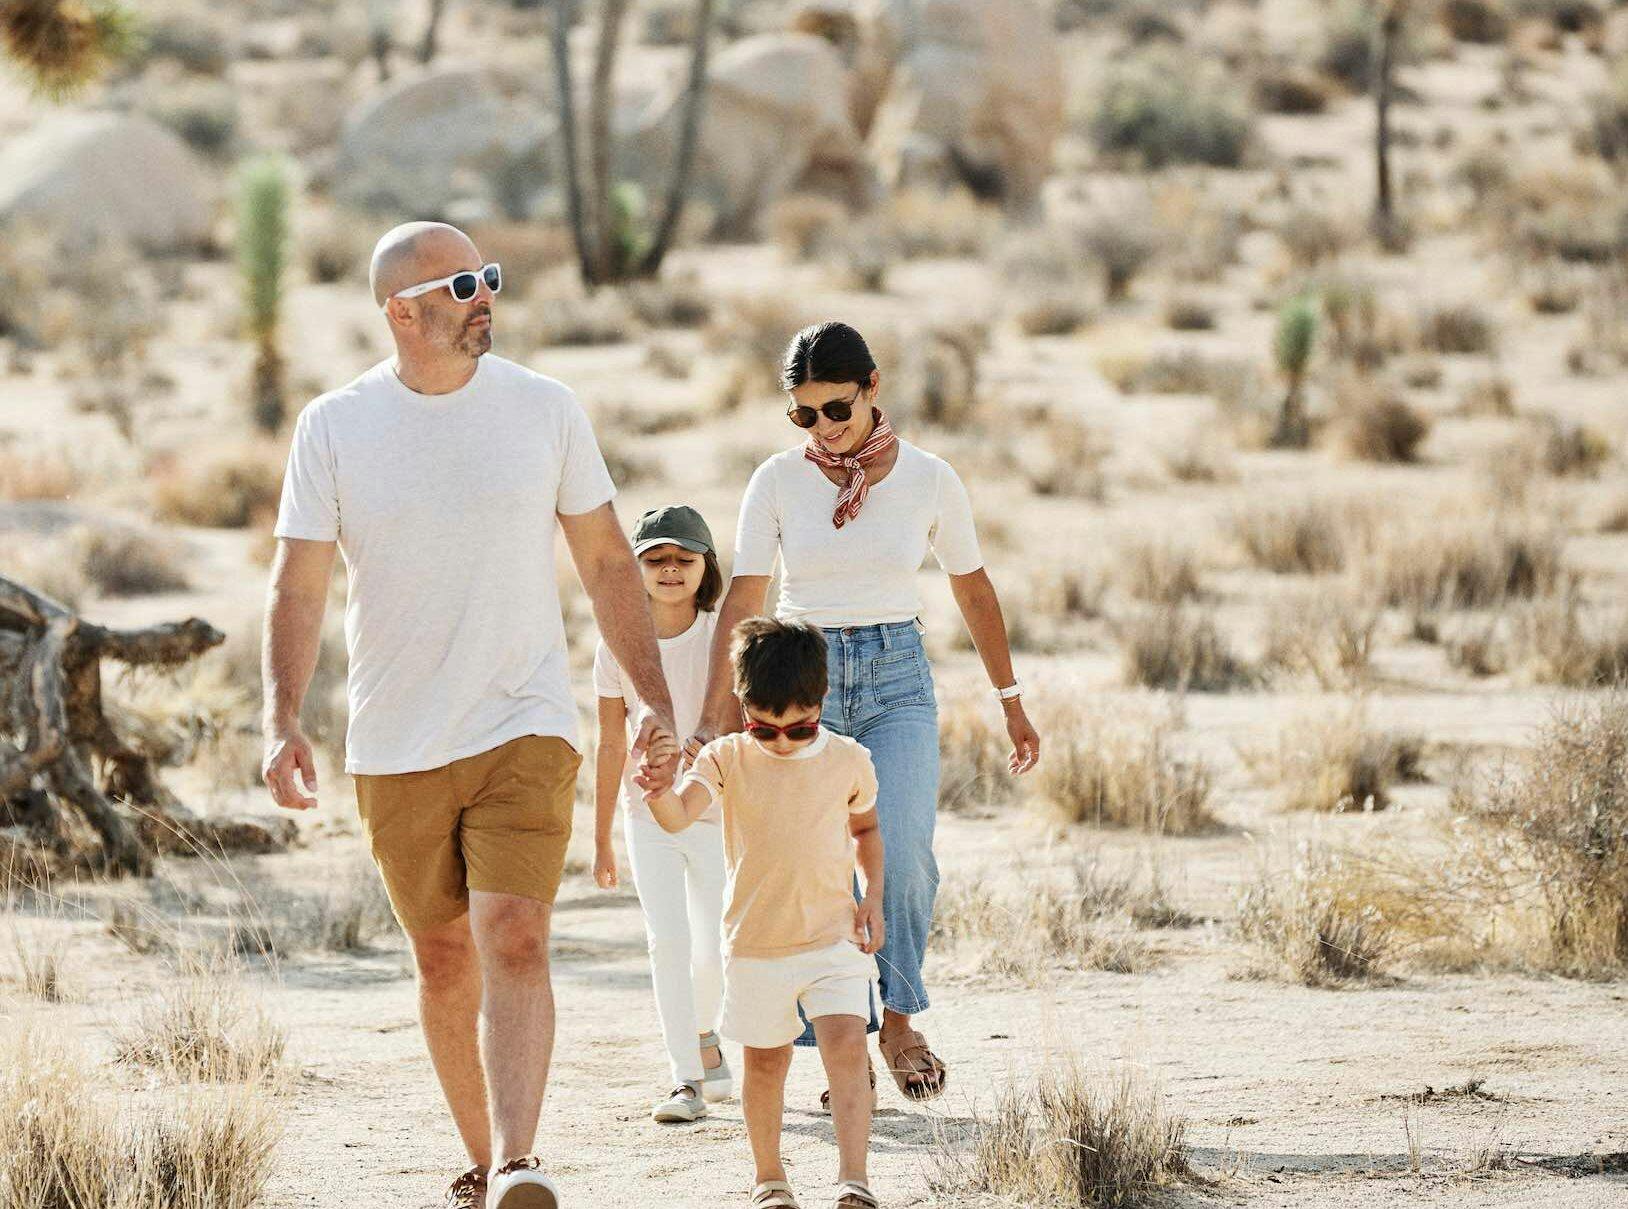 A family with 2 young children walking in a desert